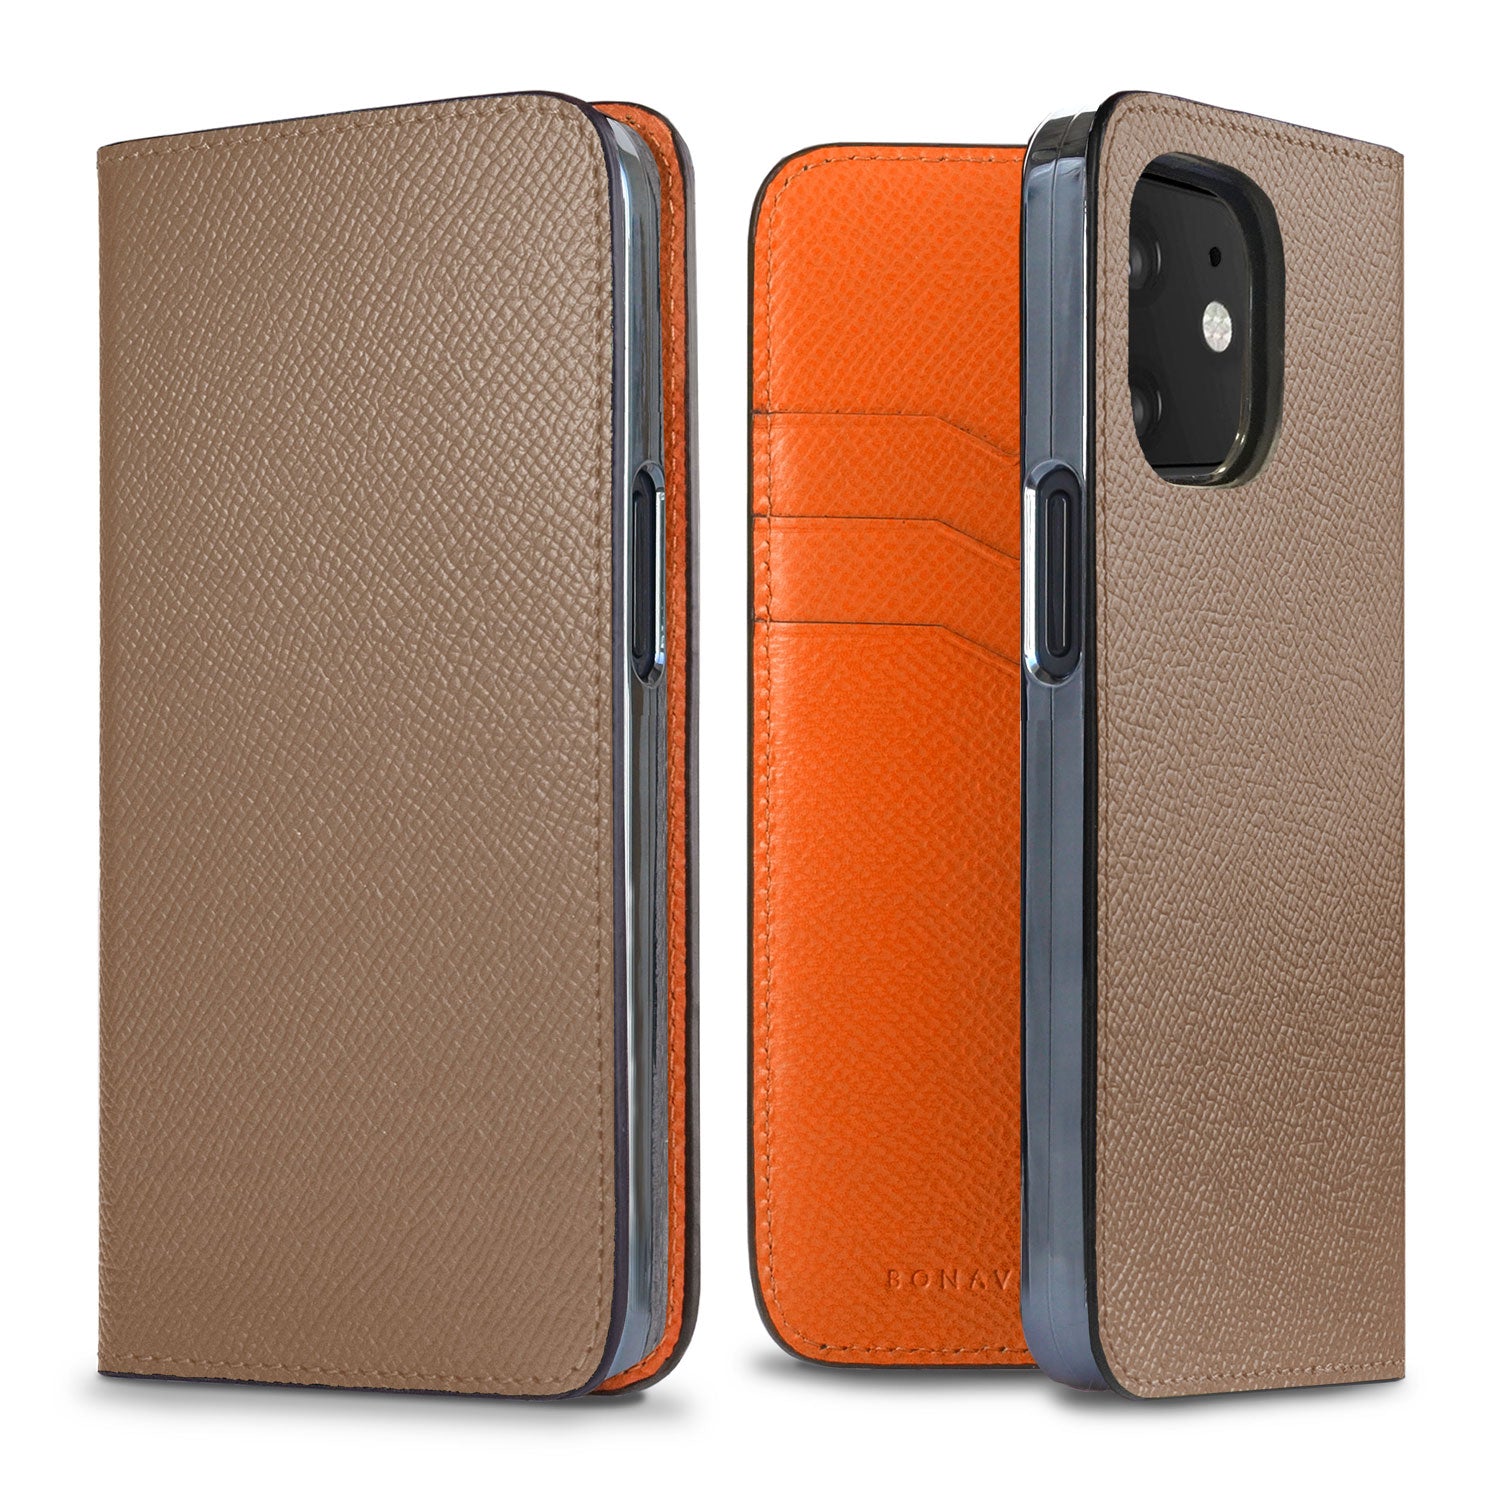 (iPhone 12 mini) Diary case in Noblesse leather